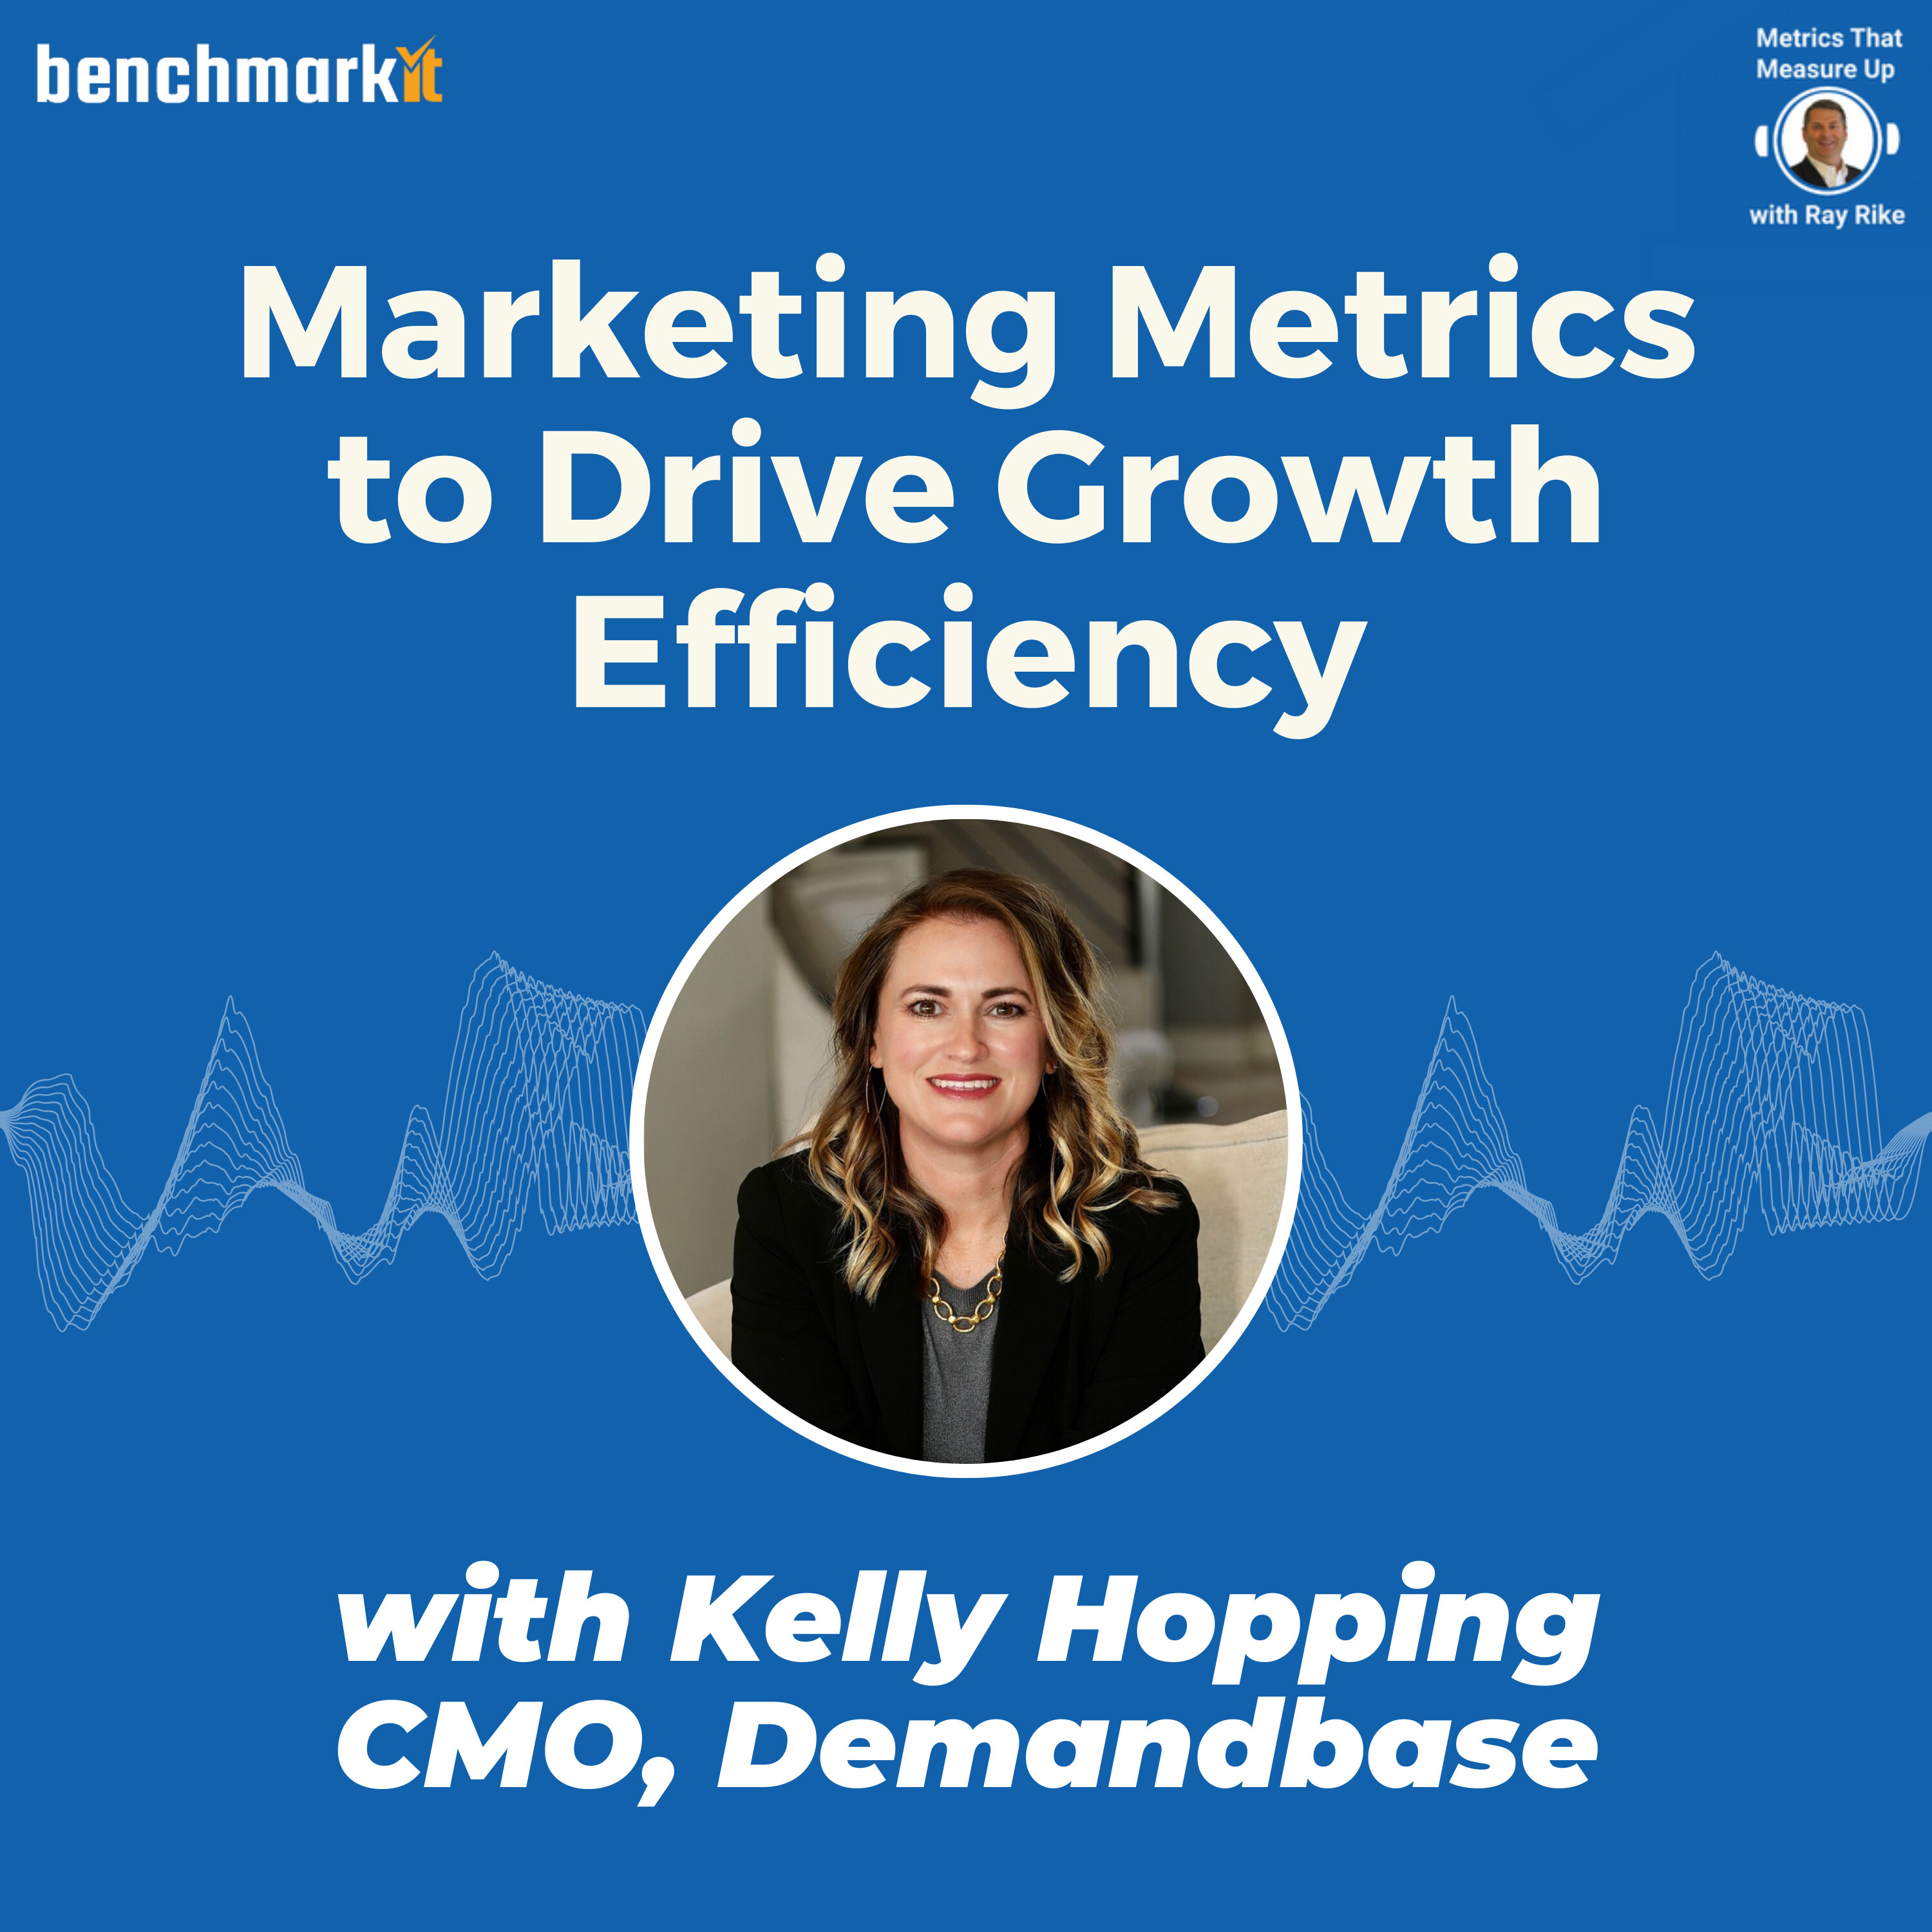 Marketing Metrics to Deliver Growth Efficiency - with Kelly Hopping, CMO Demandbase